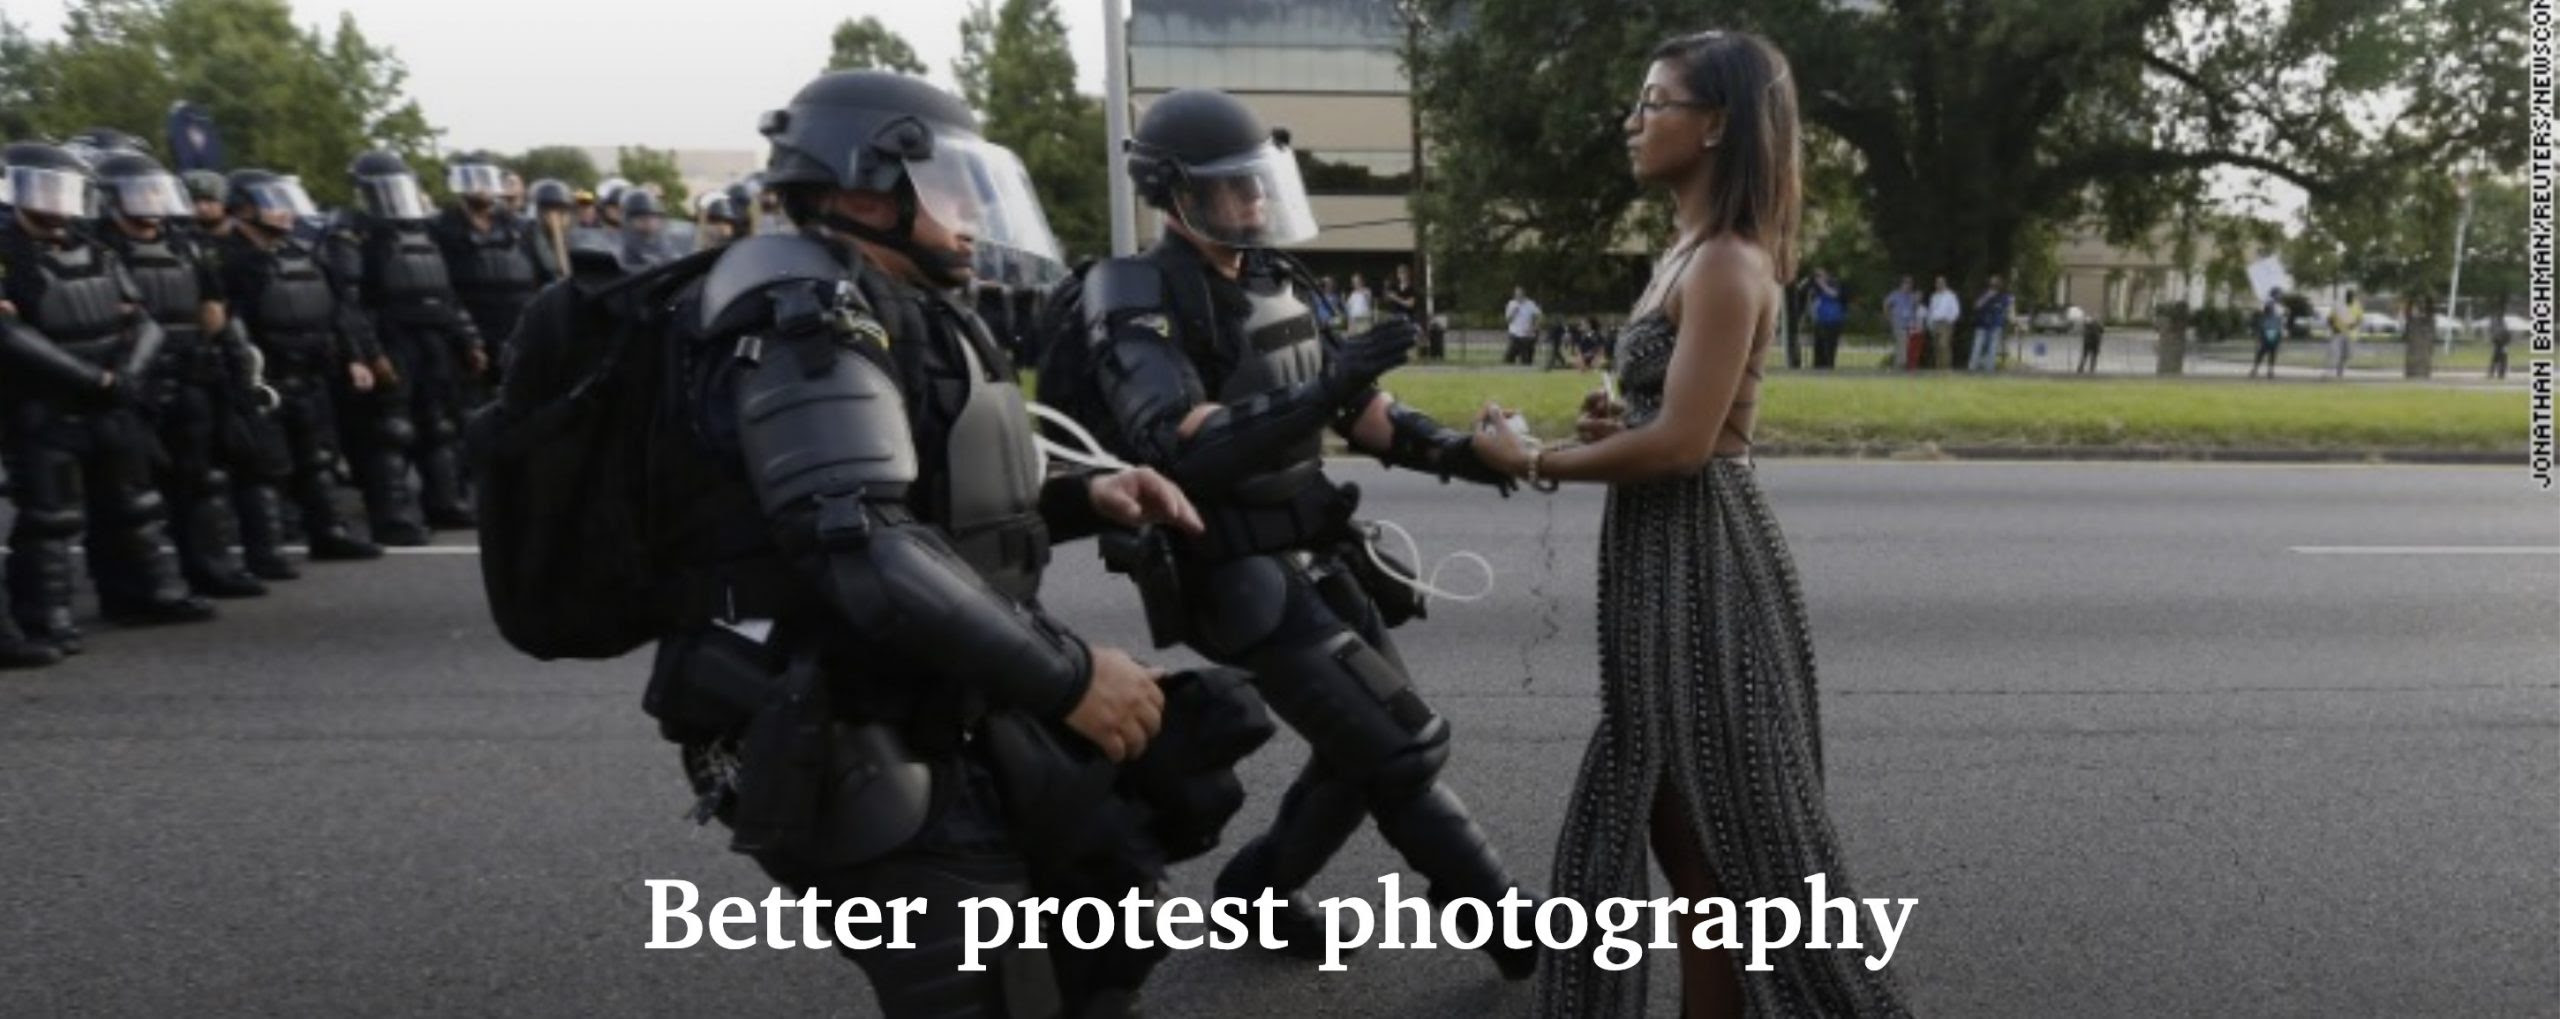 Tips to take better protest photography while staying safe